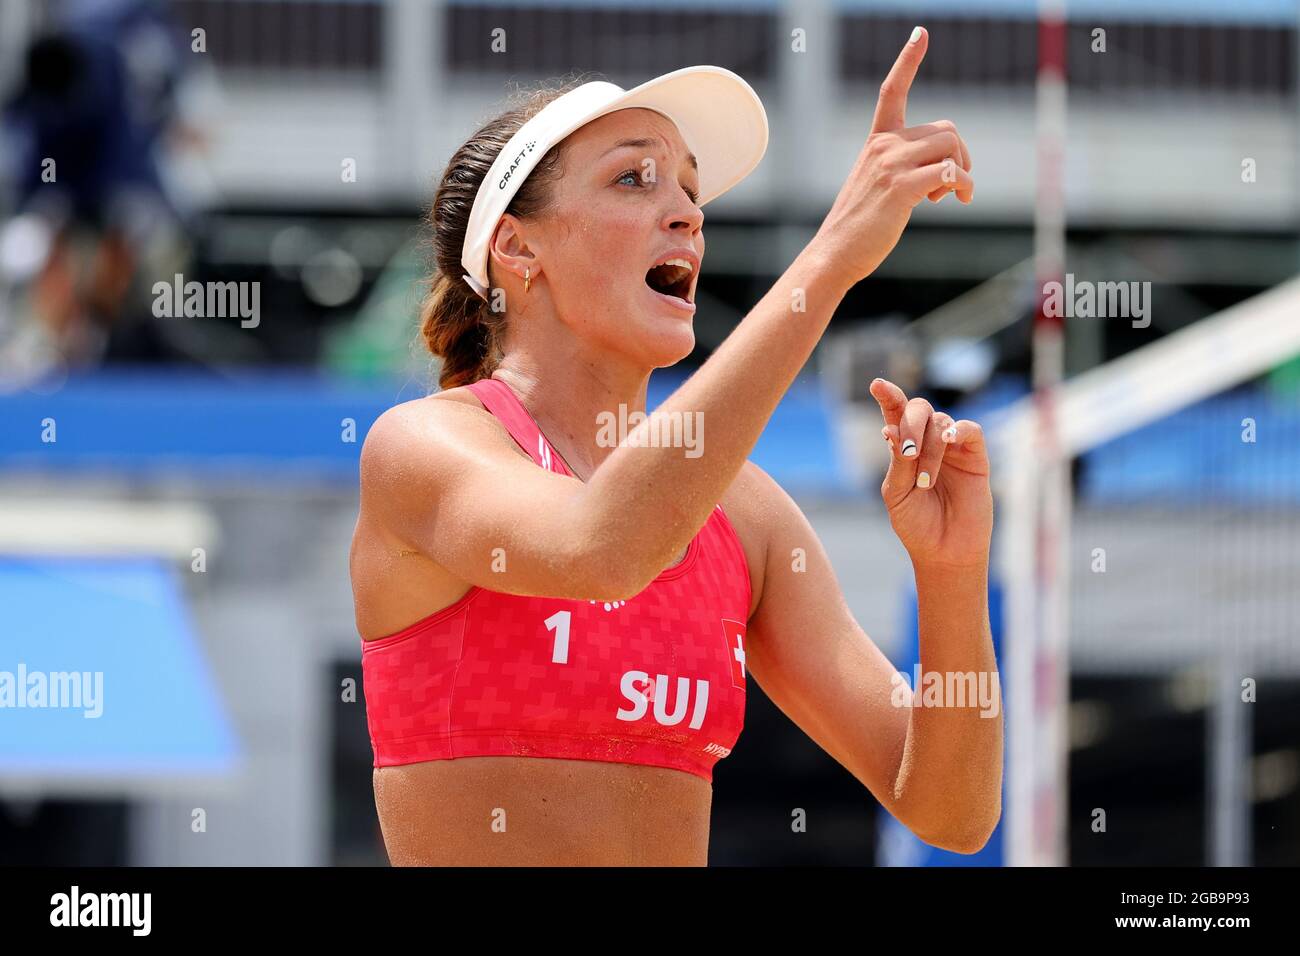 Tokyo, Japan, 3 August, 2021. Anouk Verge-Depre of Team Switzerland complains to the referee during the Women's Beach Volleyball Quarterfinal match between Brazil and Switzerland on Day 11 of the Tokyo 2020 Olympic Games. Credit: Pete Dovgan/Speed Media/Alamy Live News Stock Photo